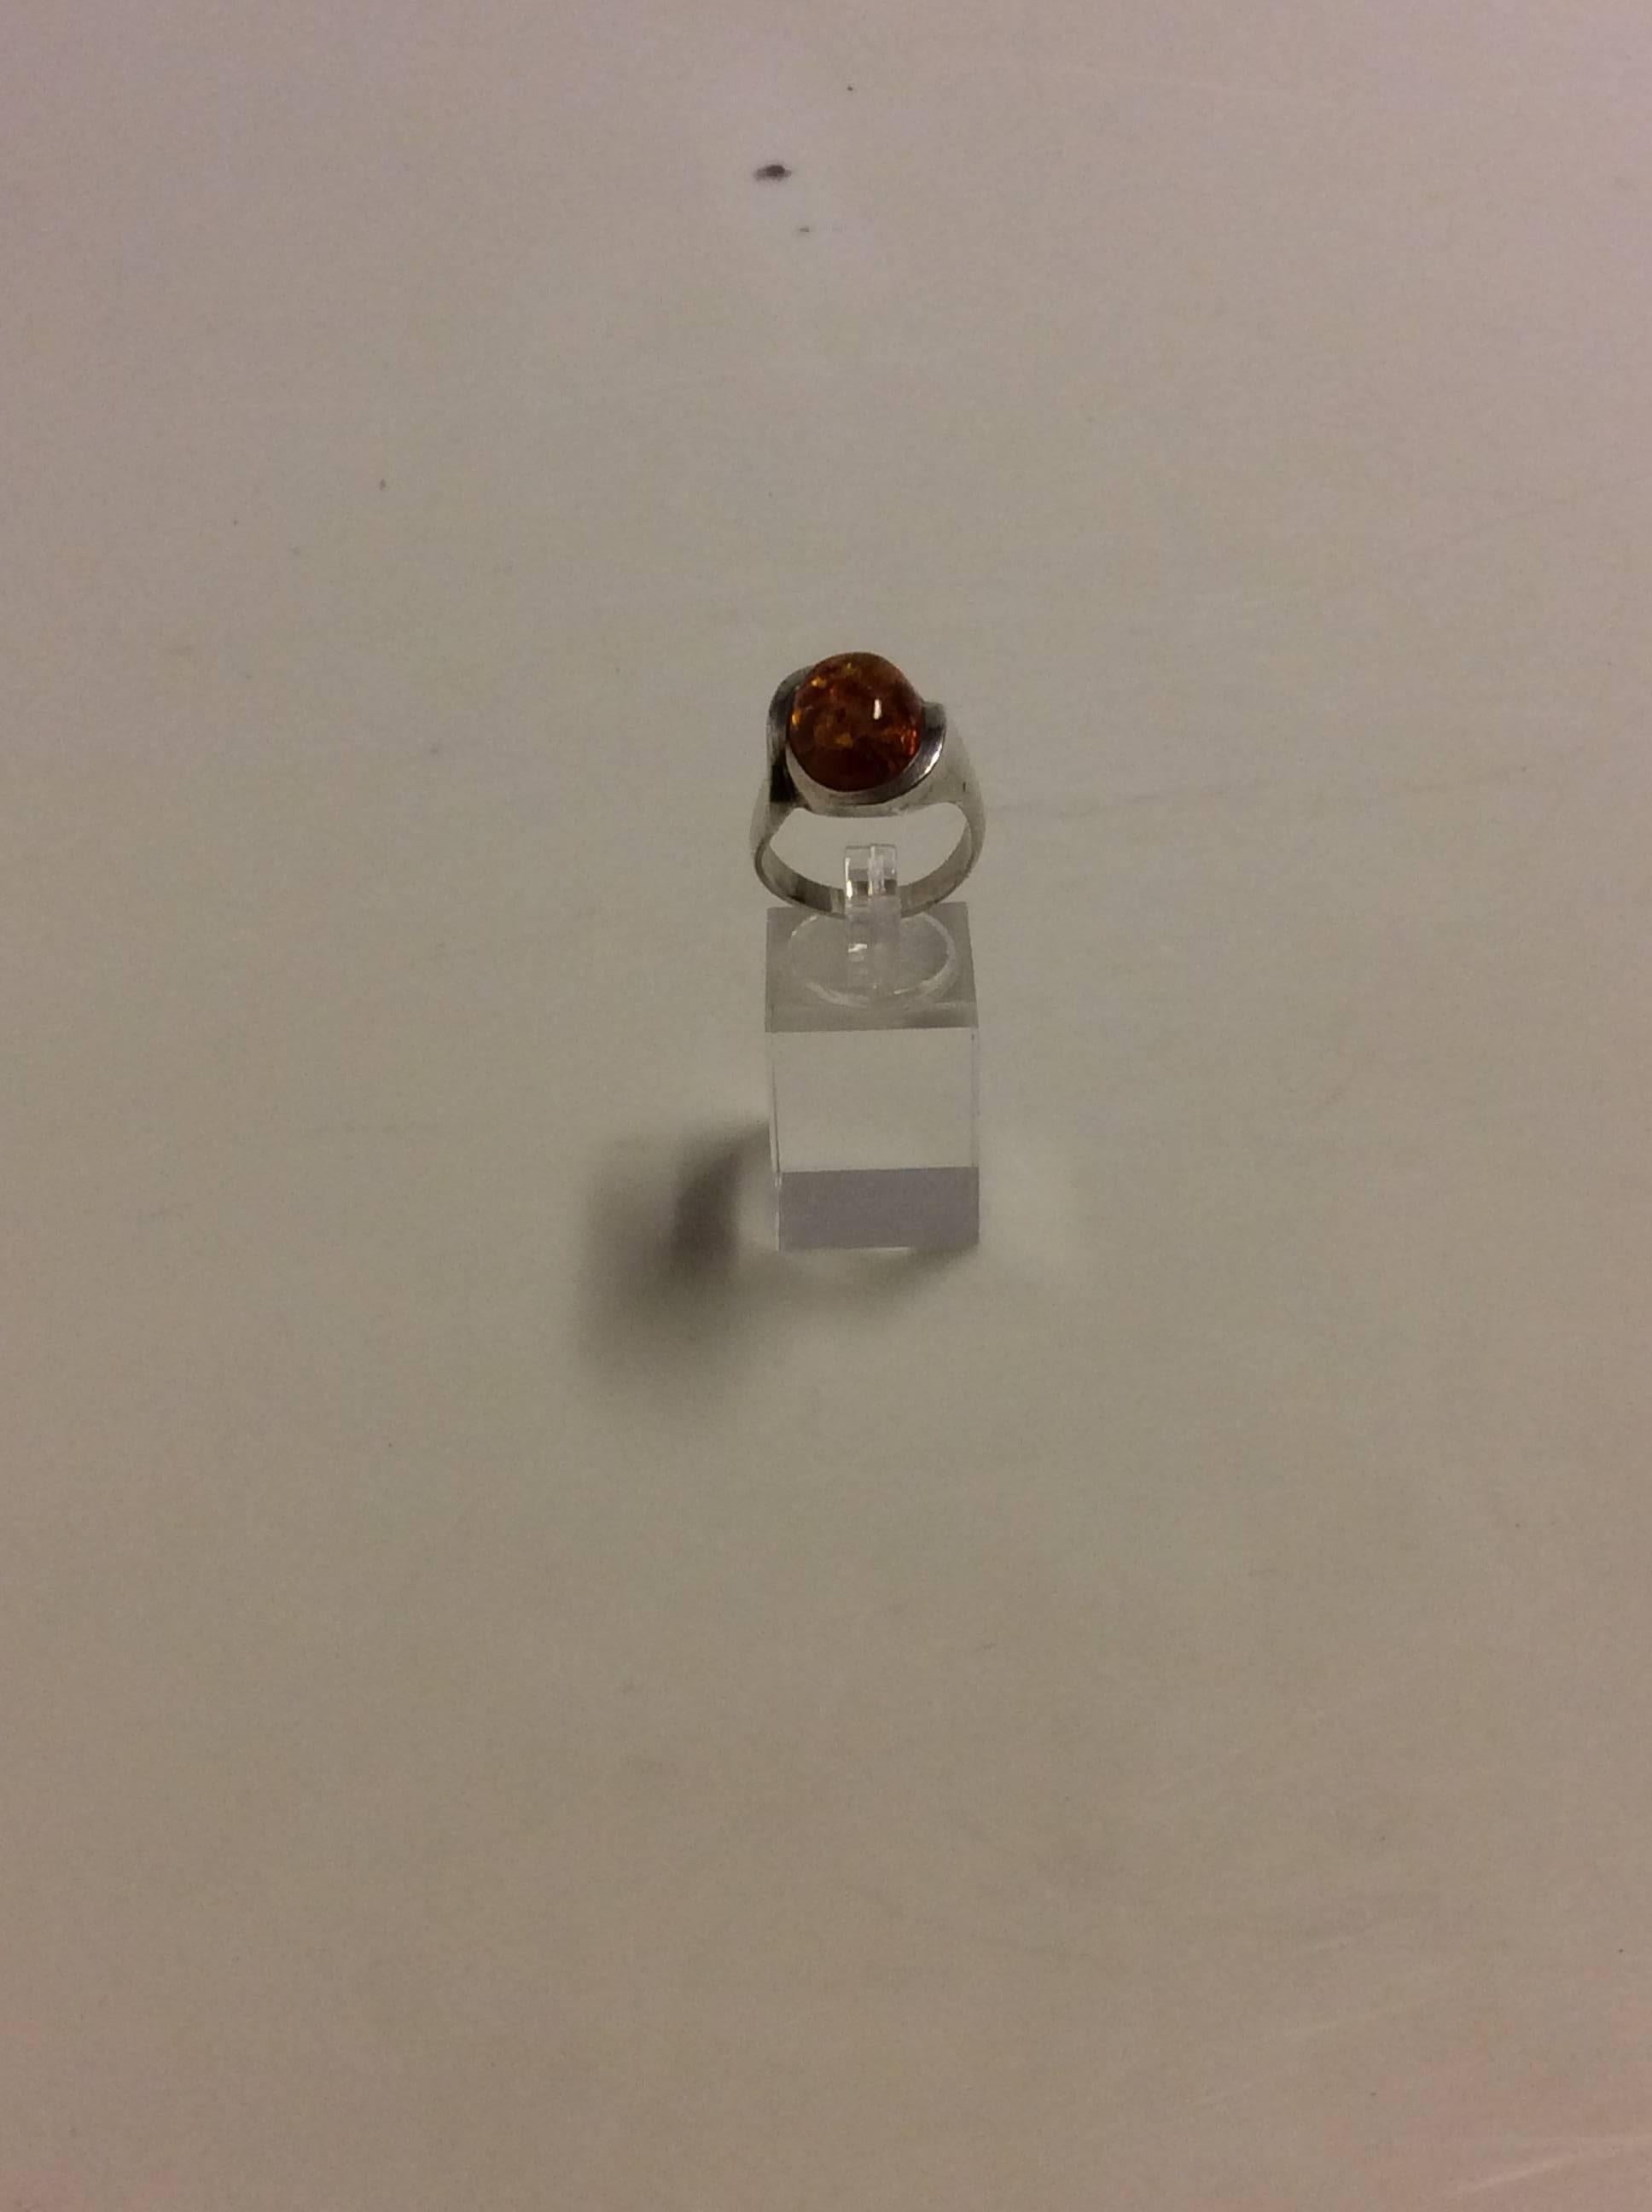 Niels Erik From Sterling Silver ring with Amber.

Ring size is 58 or US 8 1/2

Weight is: 9.71 grams / 0.342 oz.